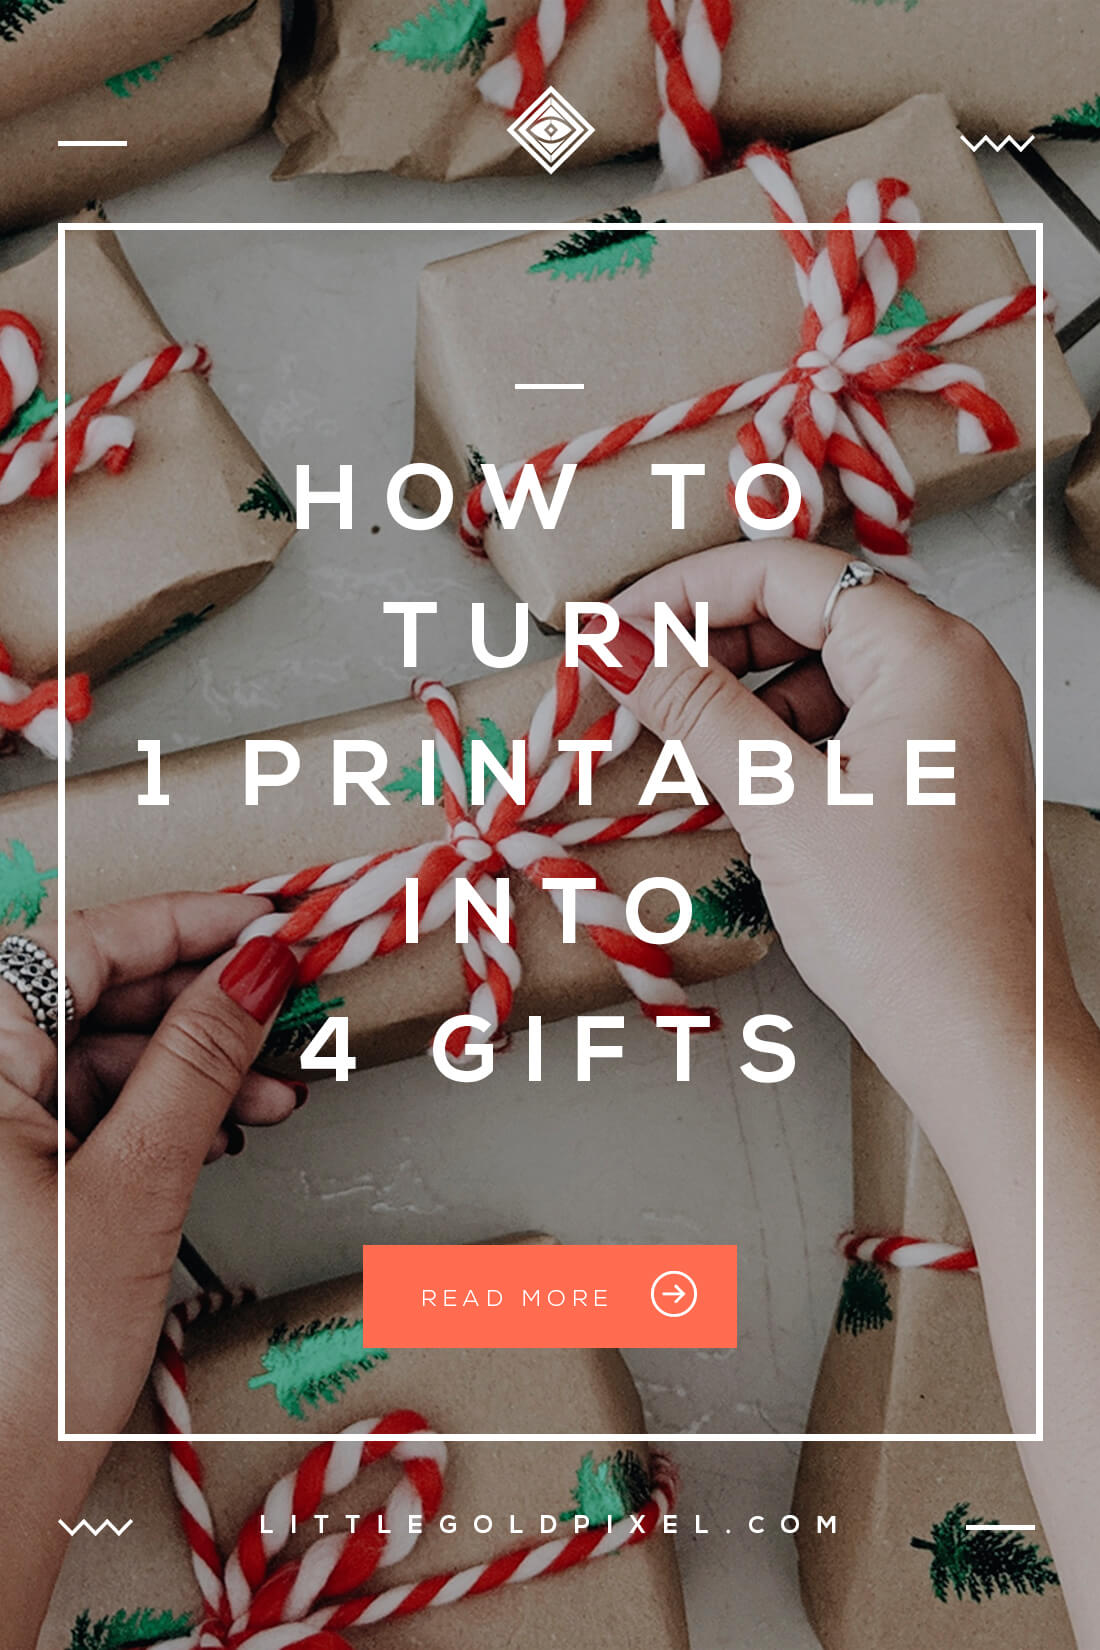 Printable Gift Ideas • How to Turn 1 Printable into 4 Gifts • Little Gold Pixel • In which I share my secret printable gift ideas — how to turn 1 printable into 4 gifts! Consider this  permission to stress less this holiday season. #printable #printableart #artprintables #giftidea #giftideas